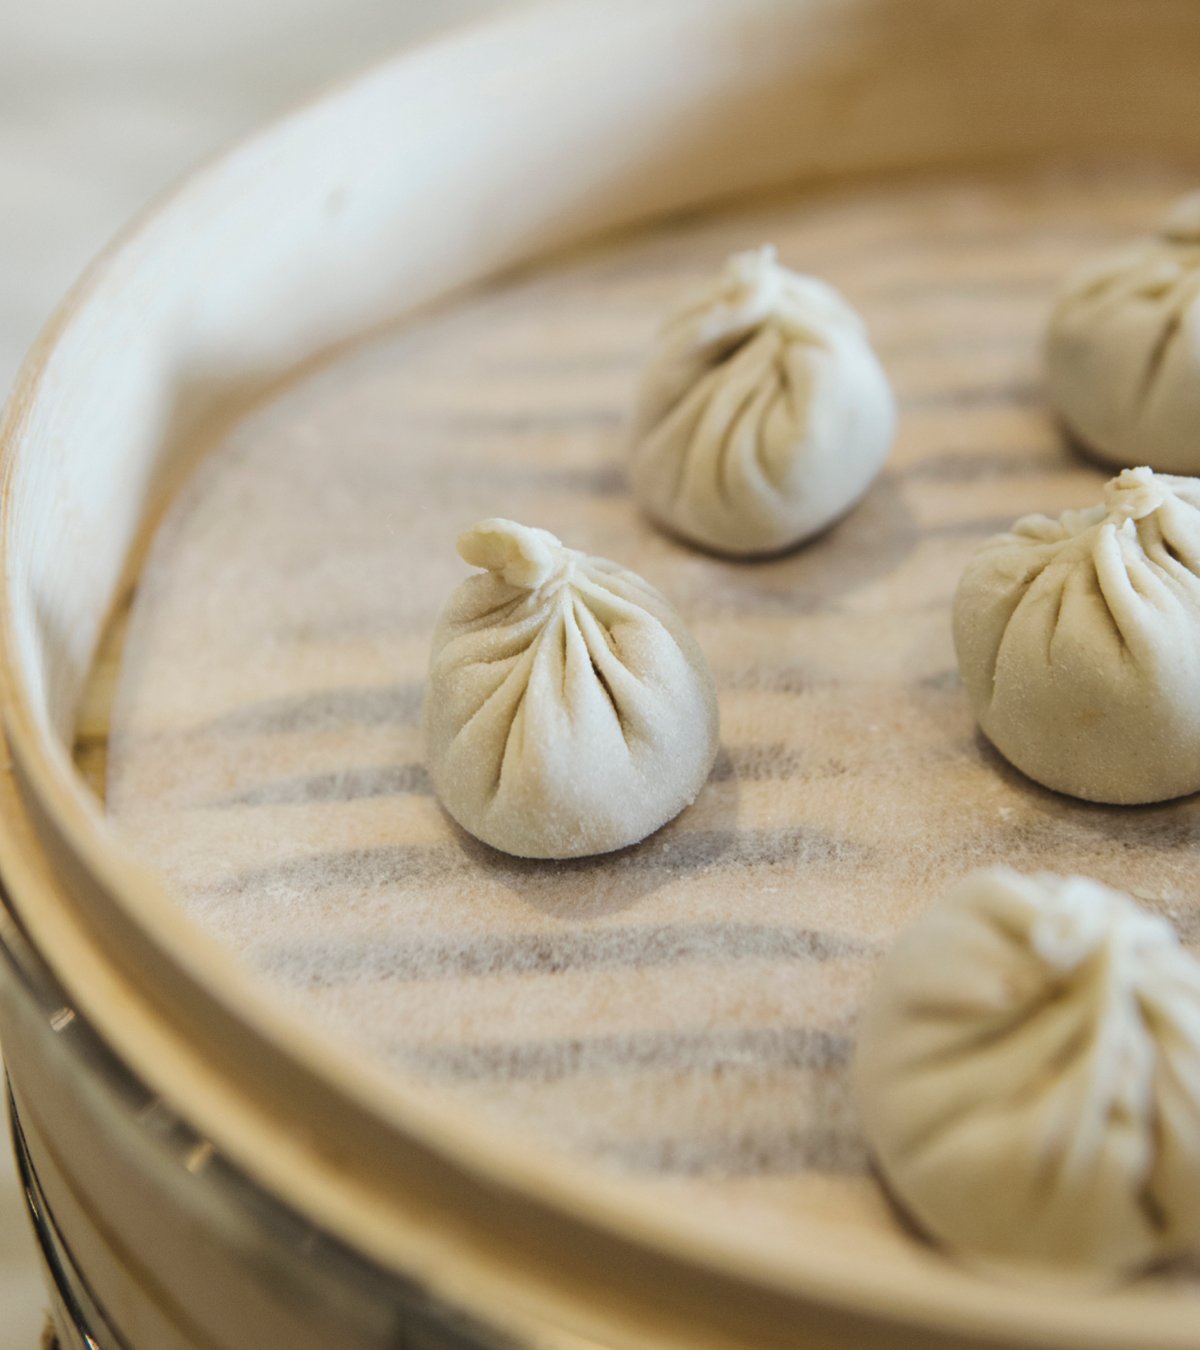 Chinese Soul Food by Hsiao-Ching Chou_Soup Dumplings_Photography by Clare Barboza